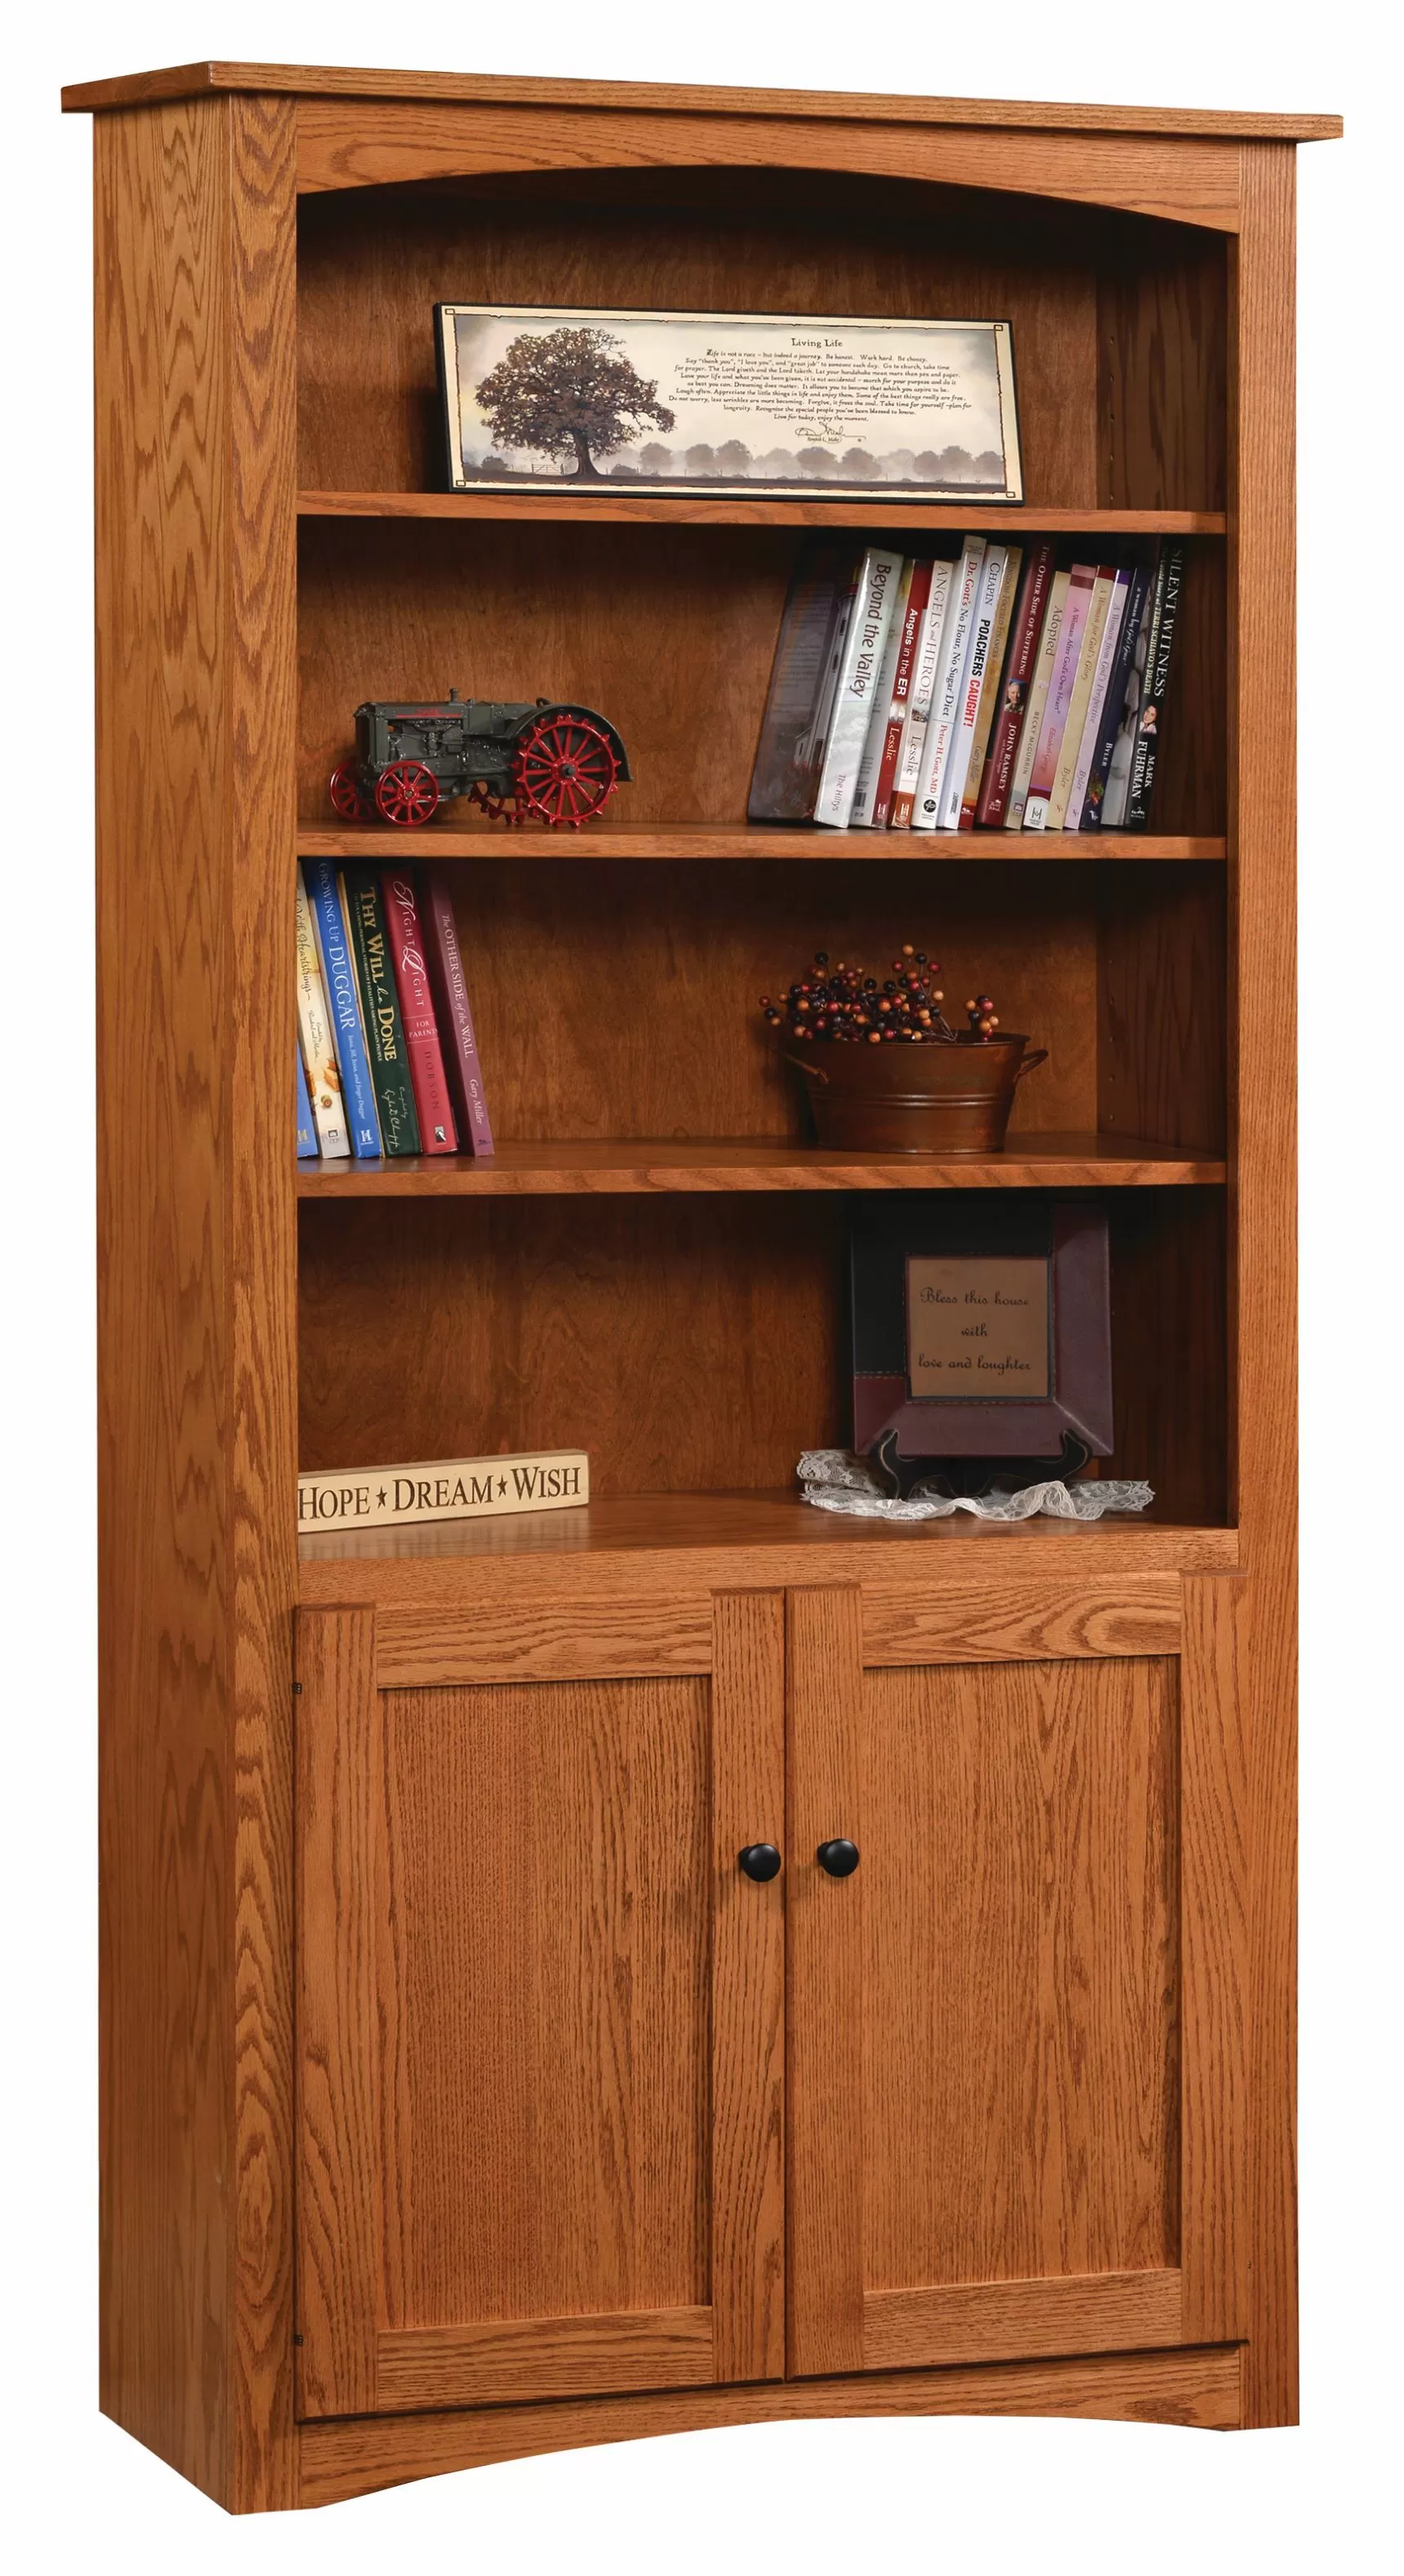 36" Shaker Bookcase with Doors